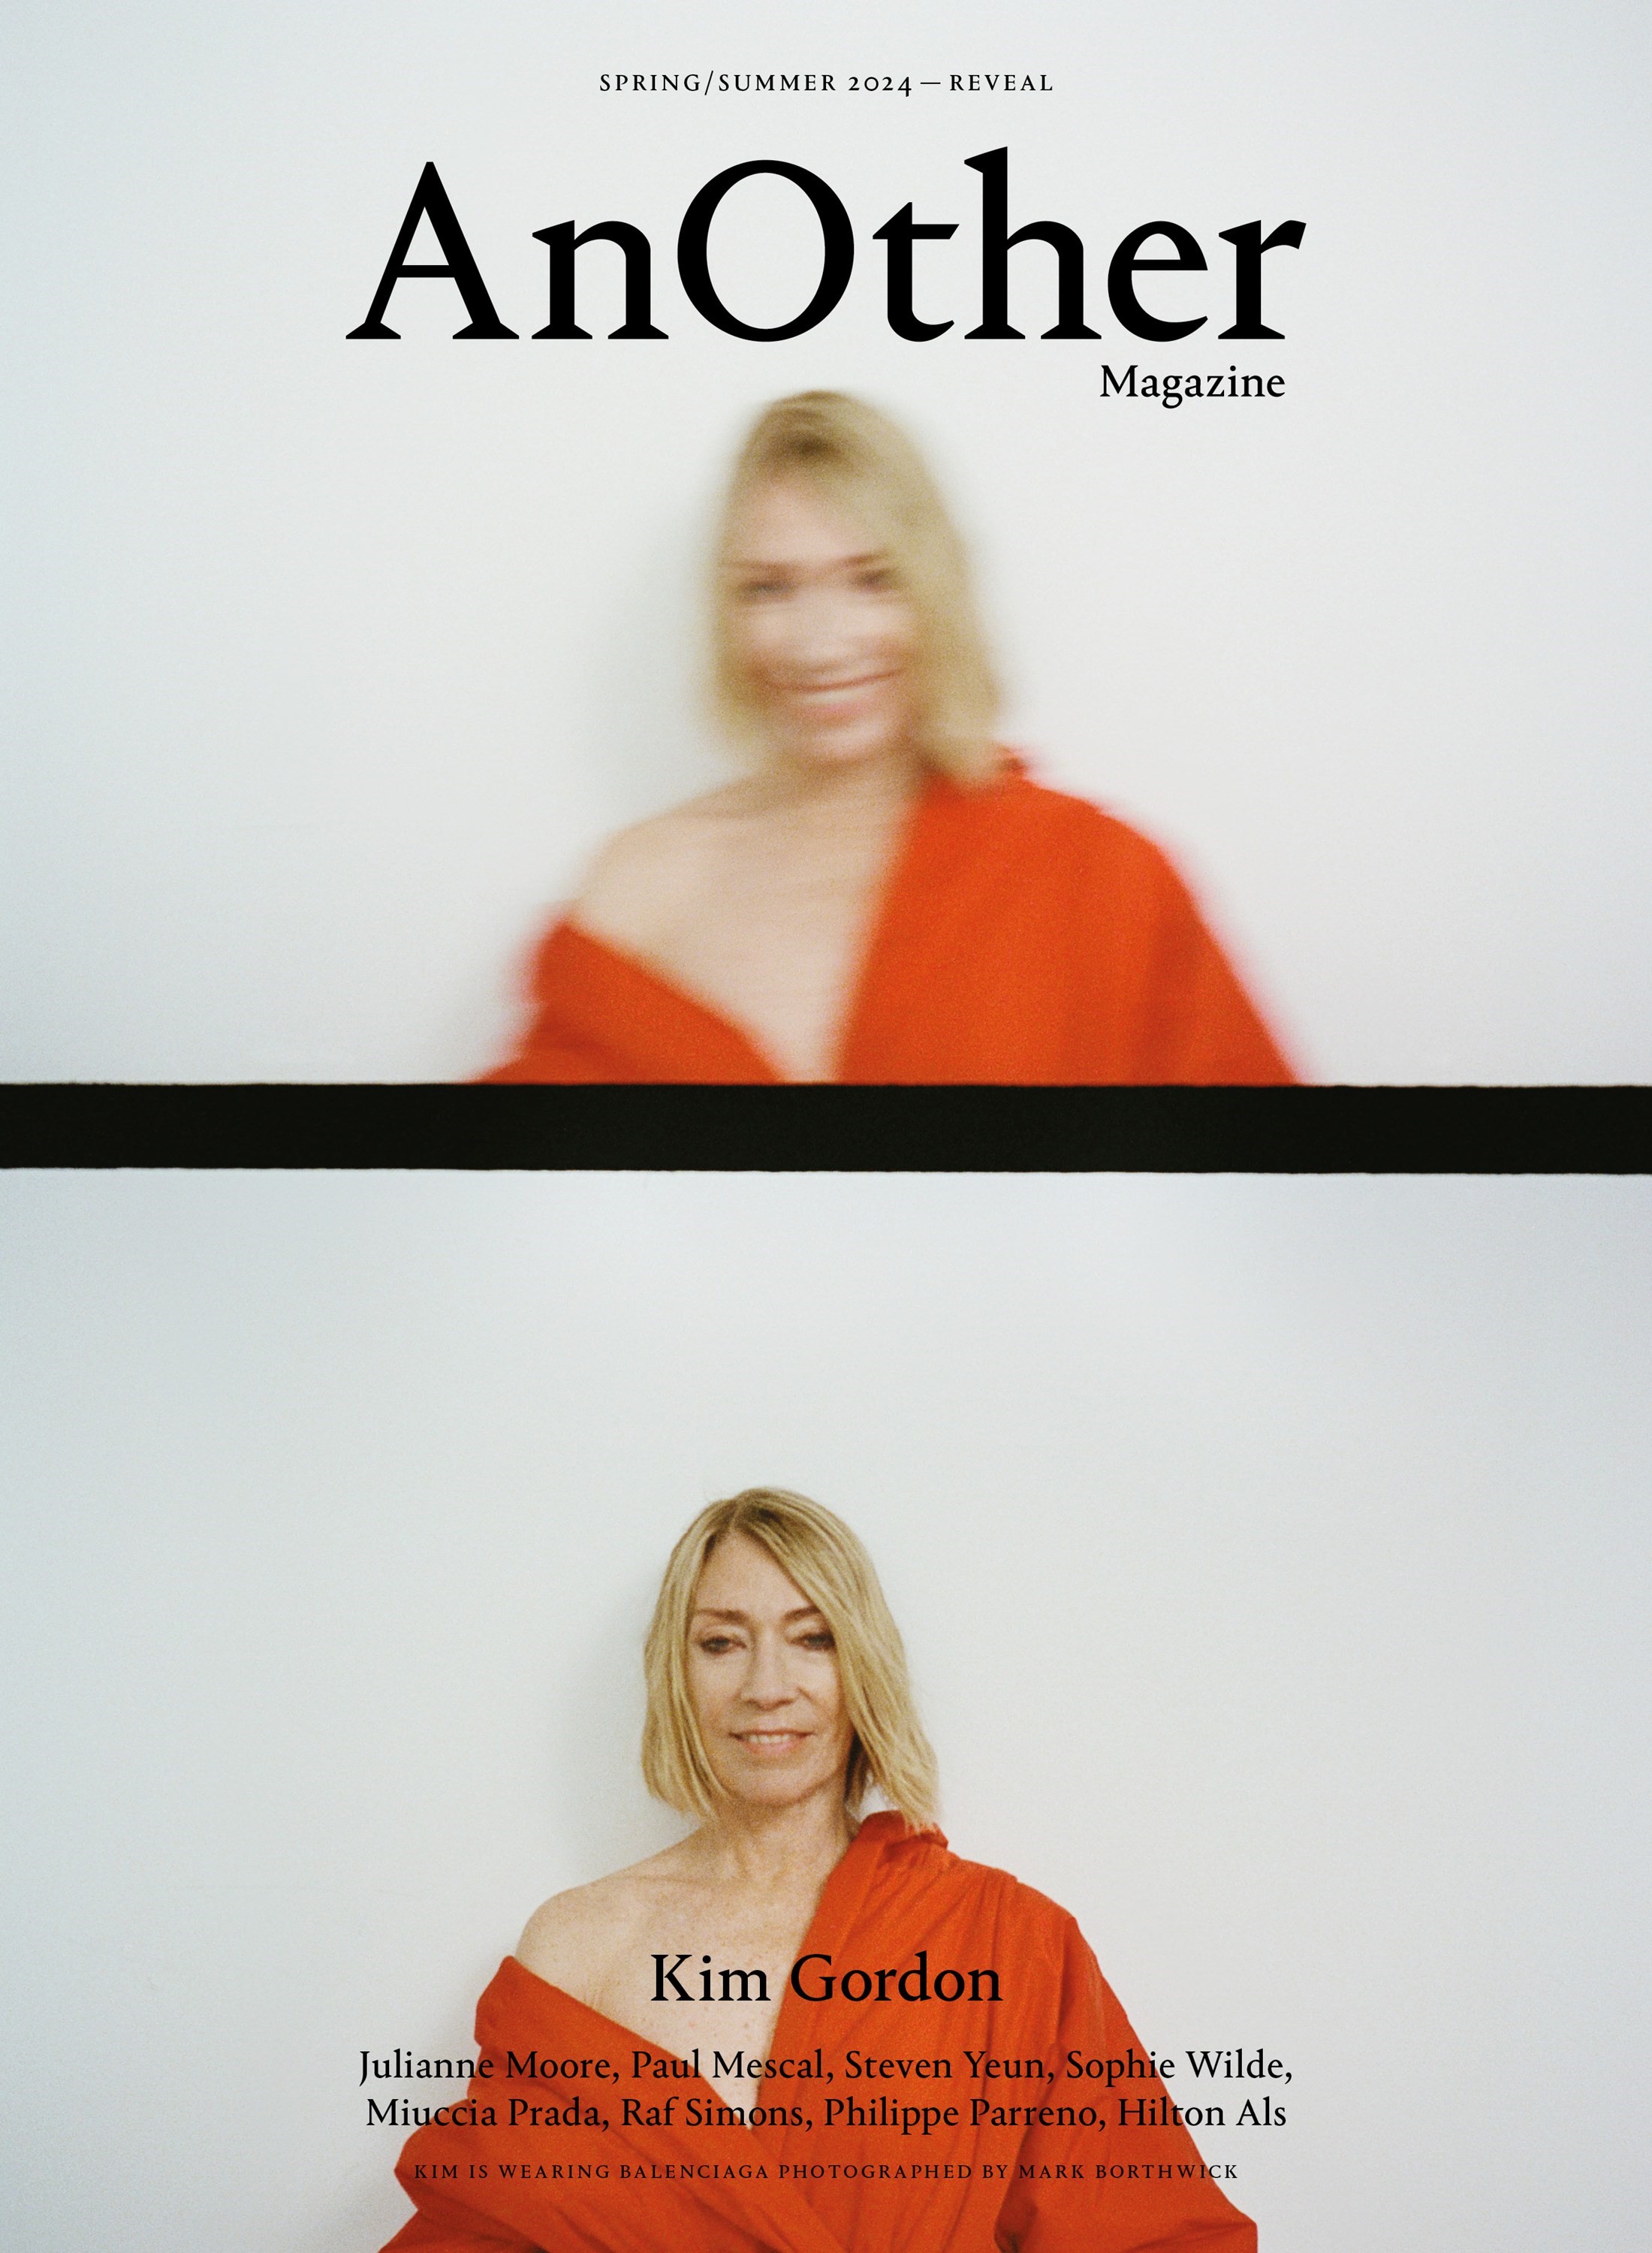 Kim Gordon makes herself at home on 'The Collective